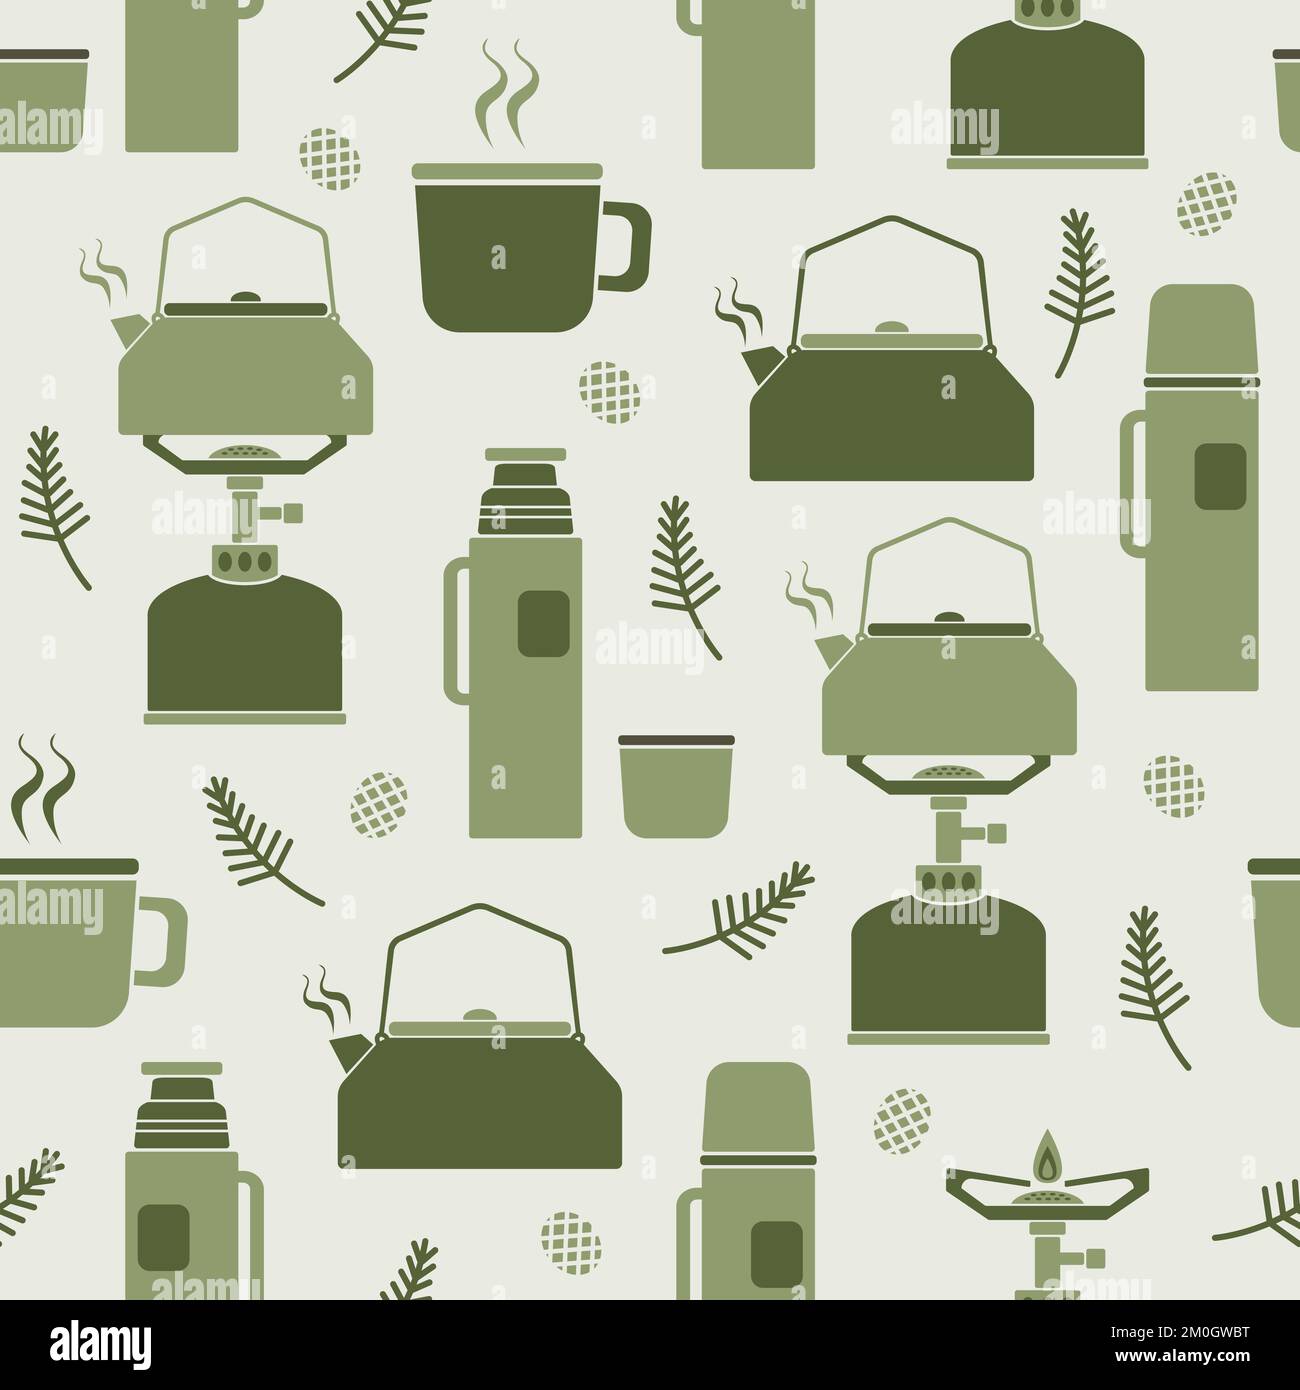 Seamless pattern with camping gas stove and coffee kettle, thermos bottles, outdoor coffee break. Stock Vector